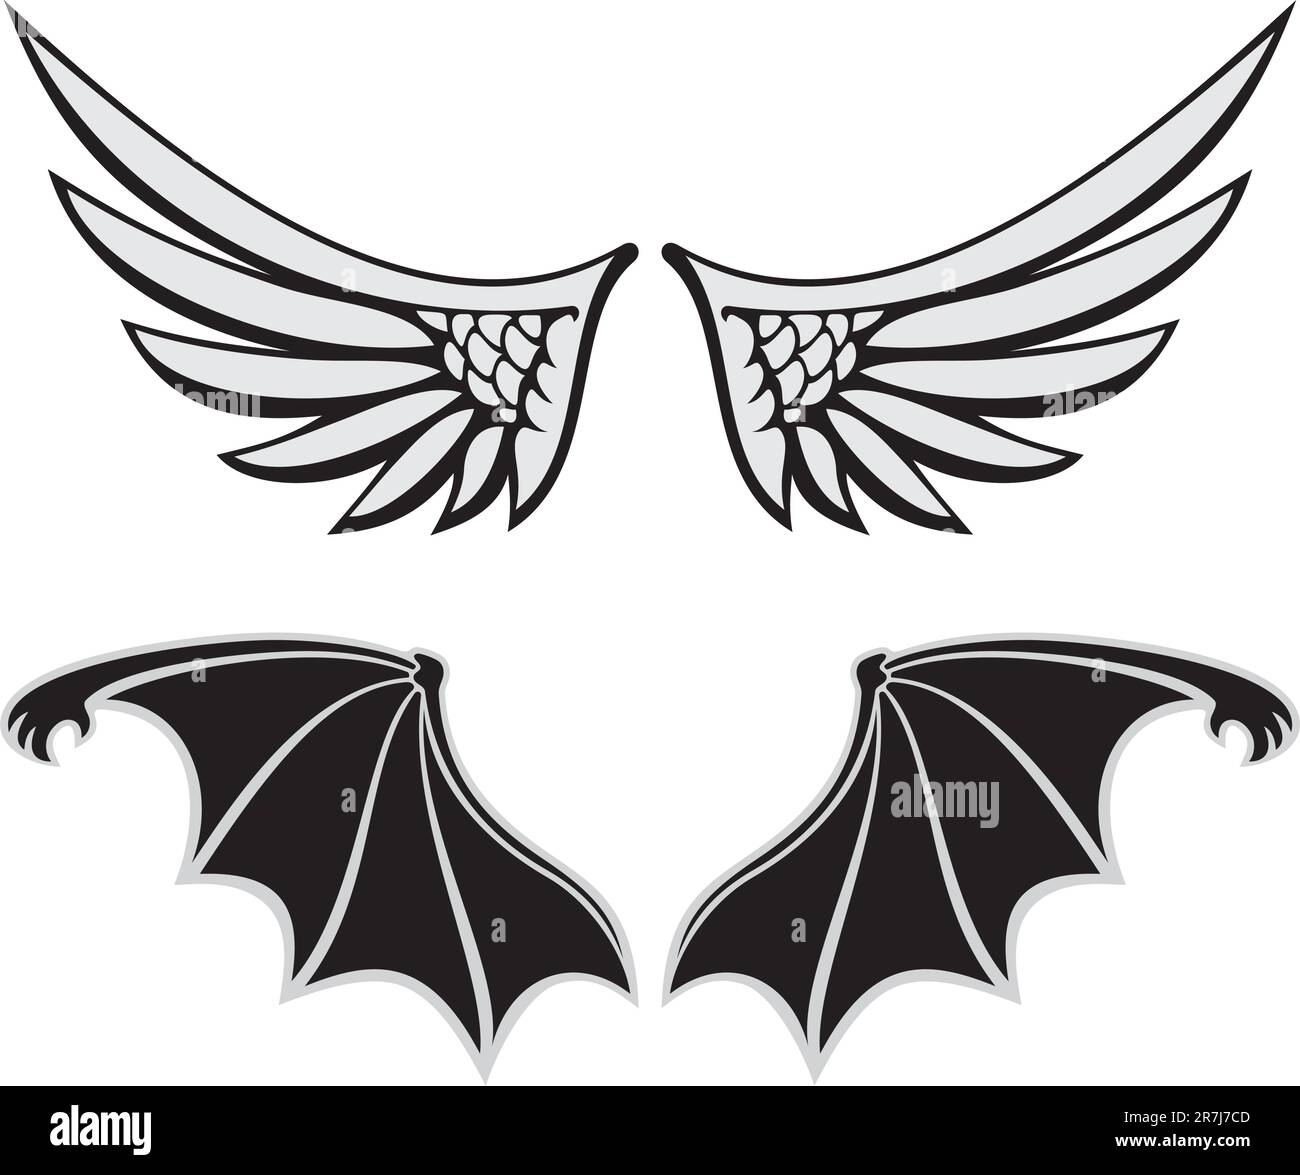 Symmetric wing shaped design elements on white background, angel and devil wings. Stock Vector